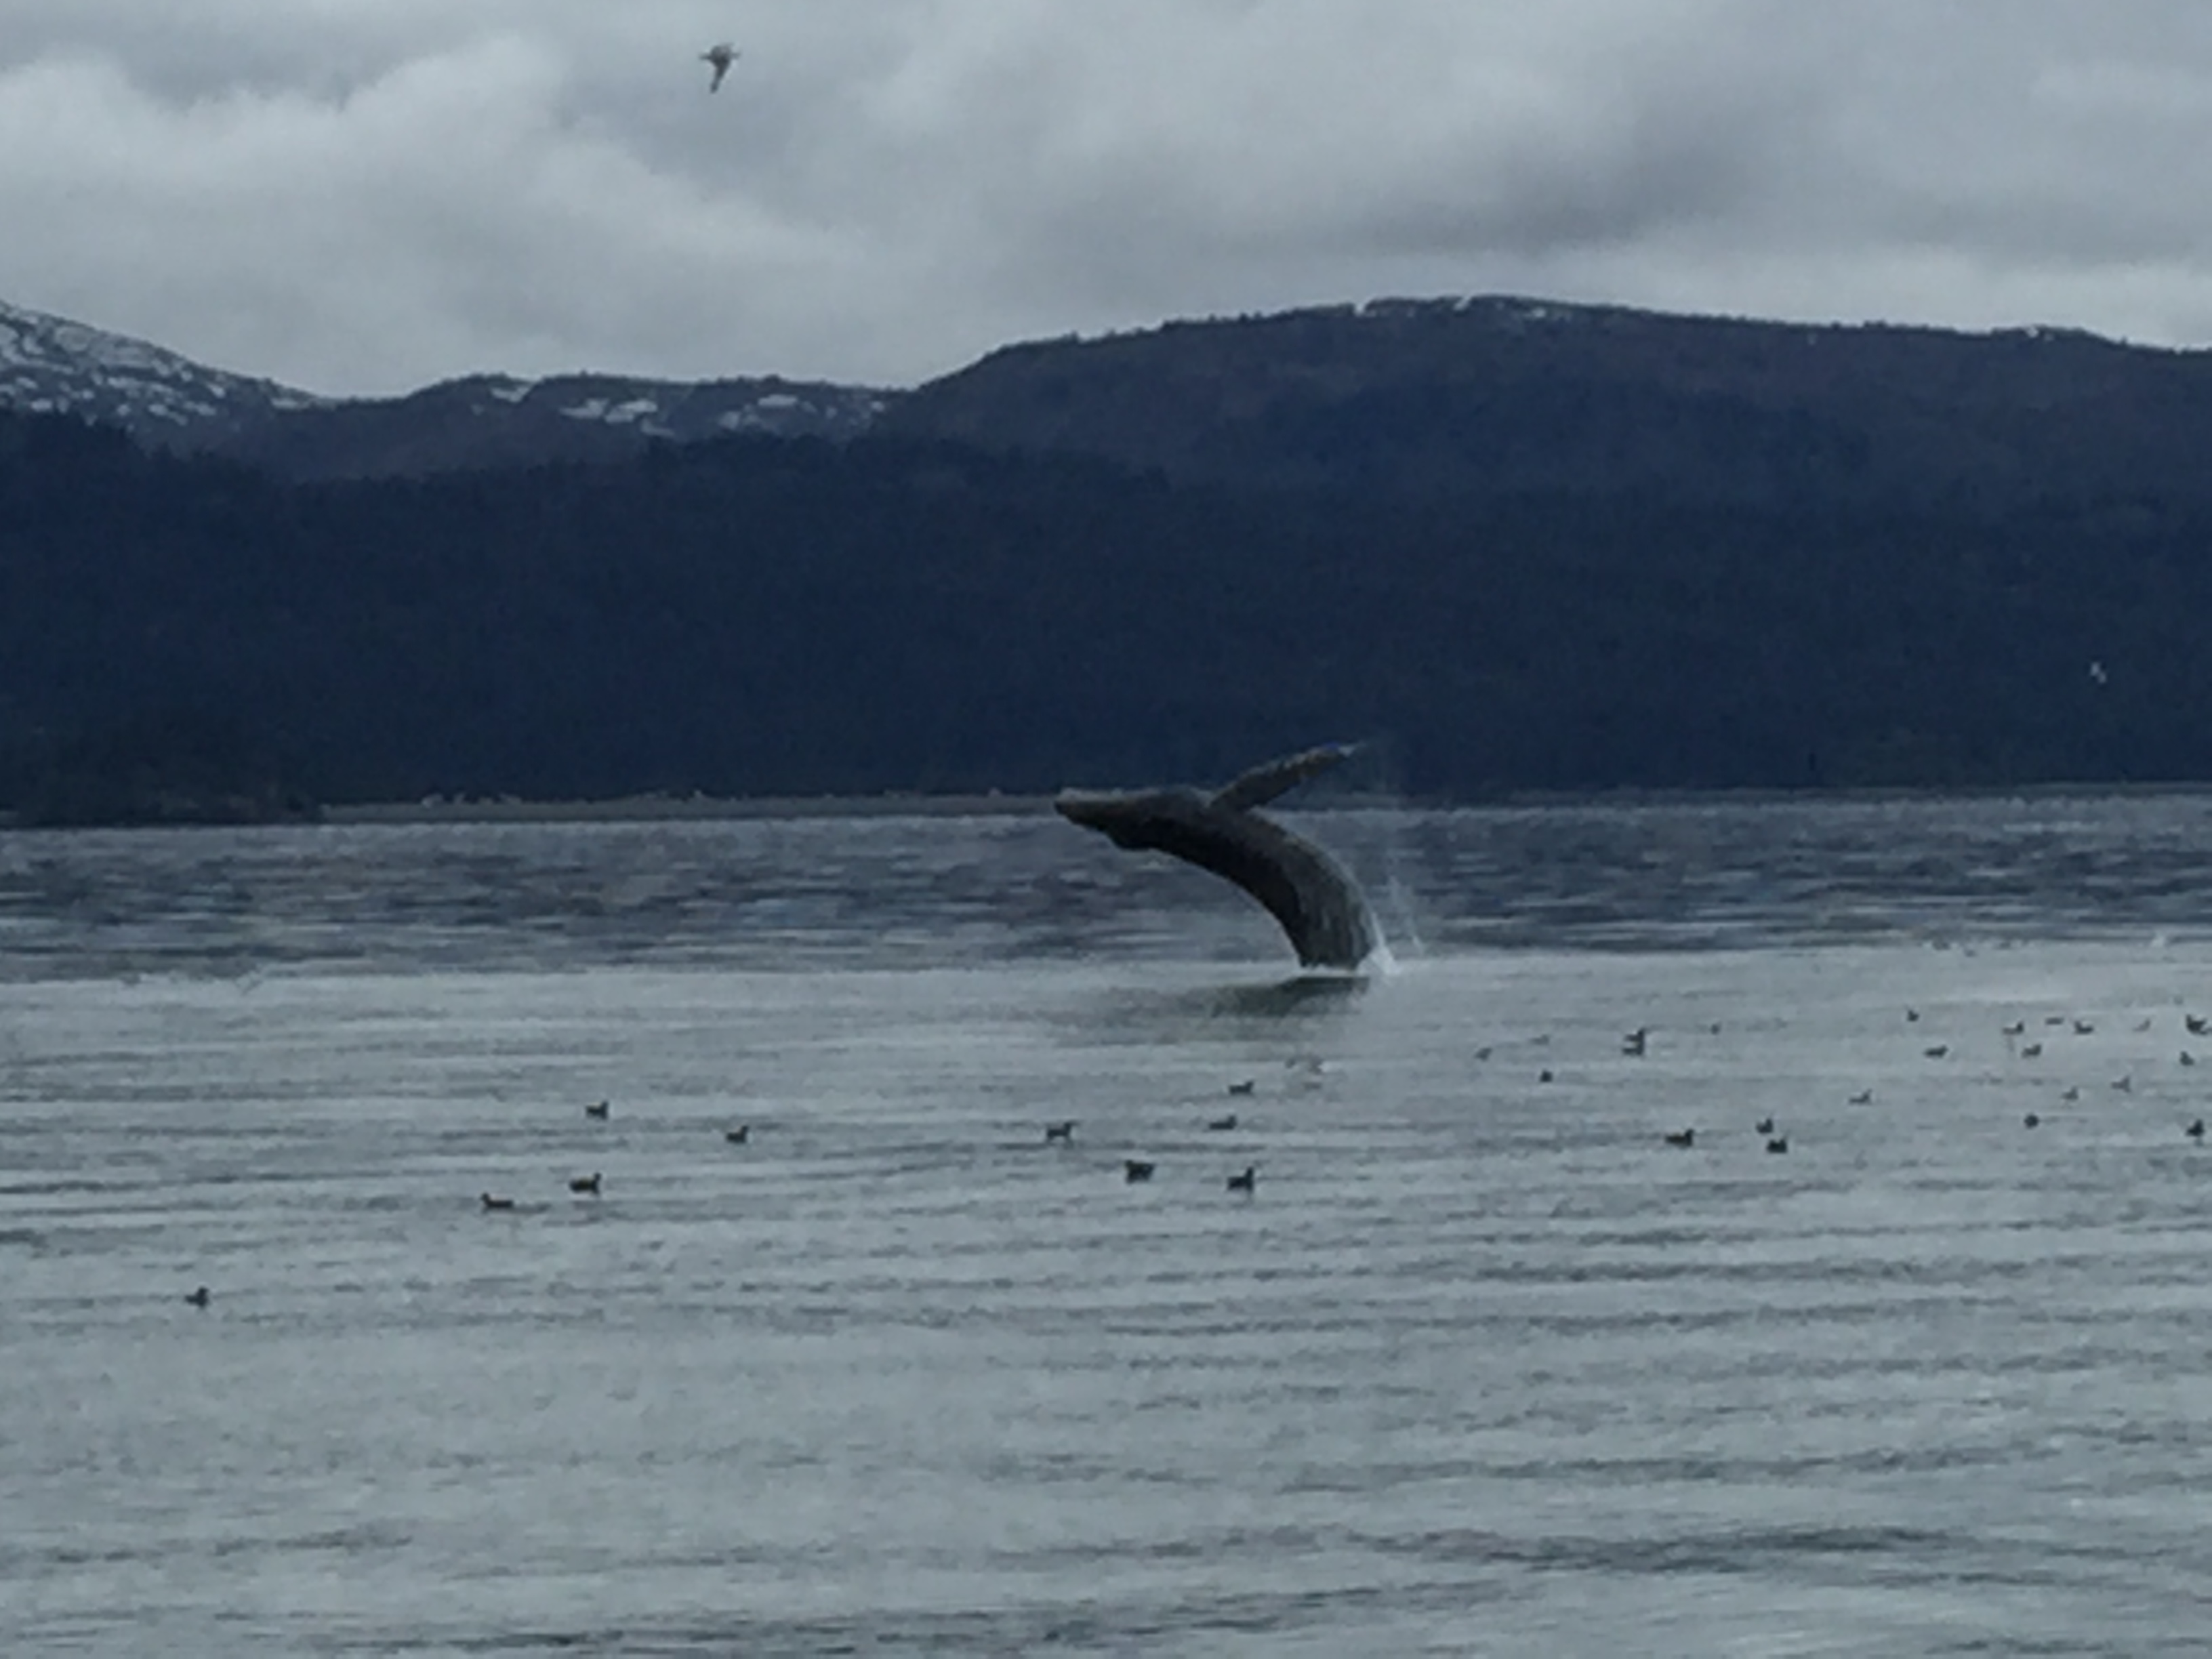 Humpback whale breaching majestically on a cloudy day